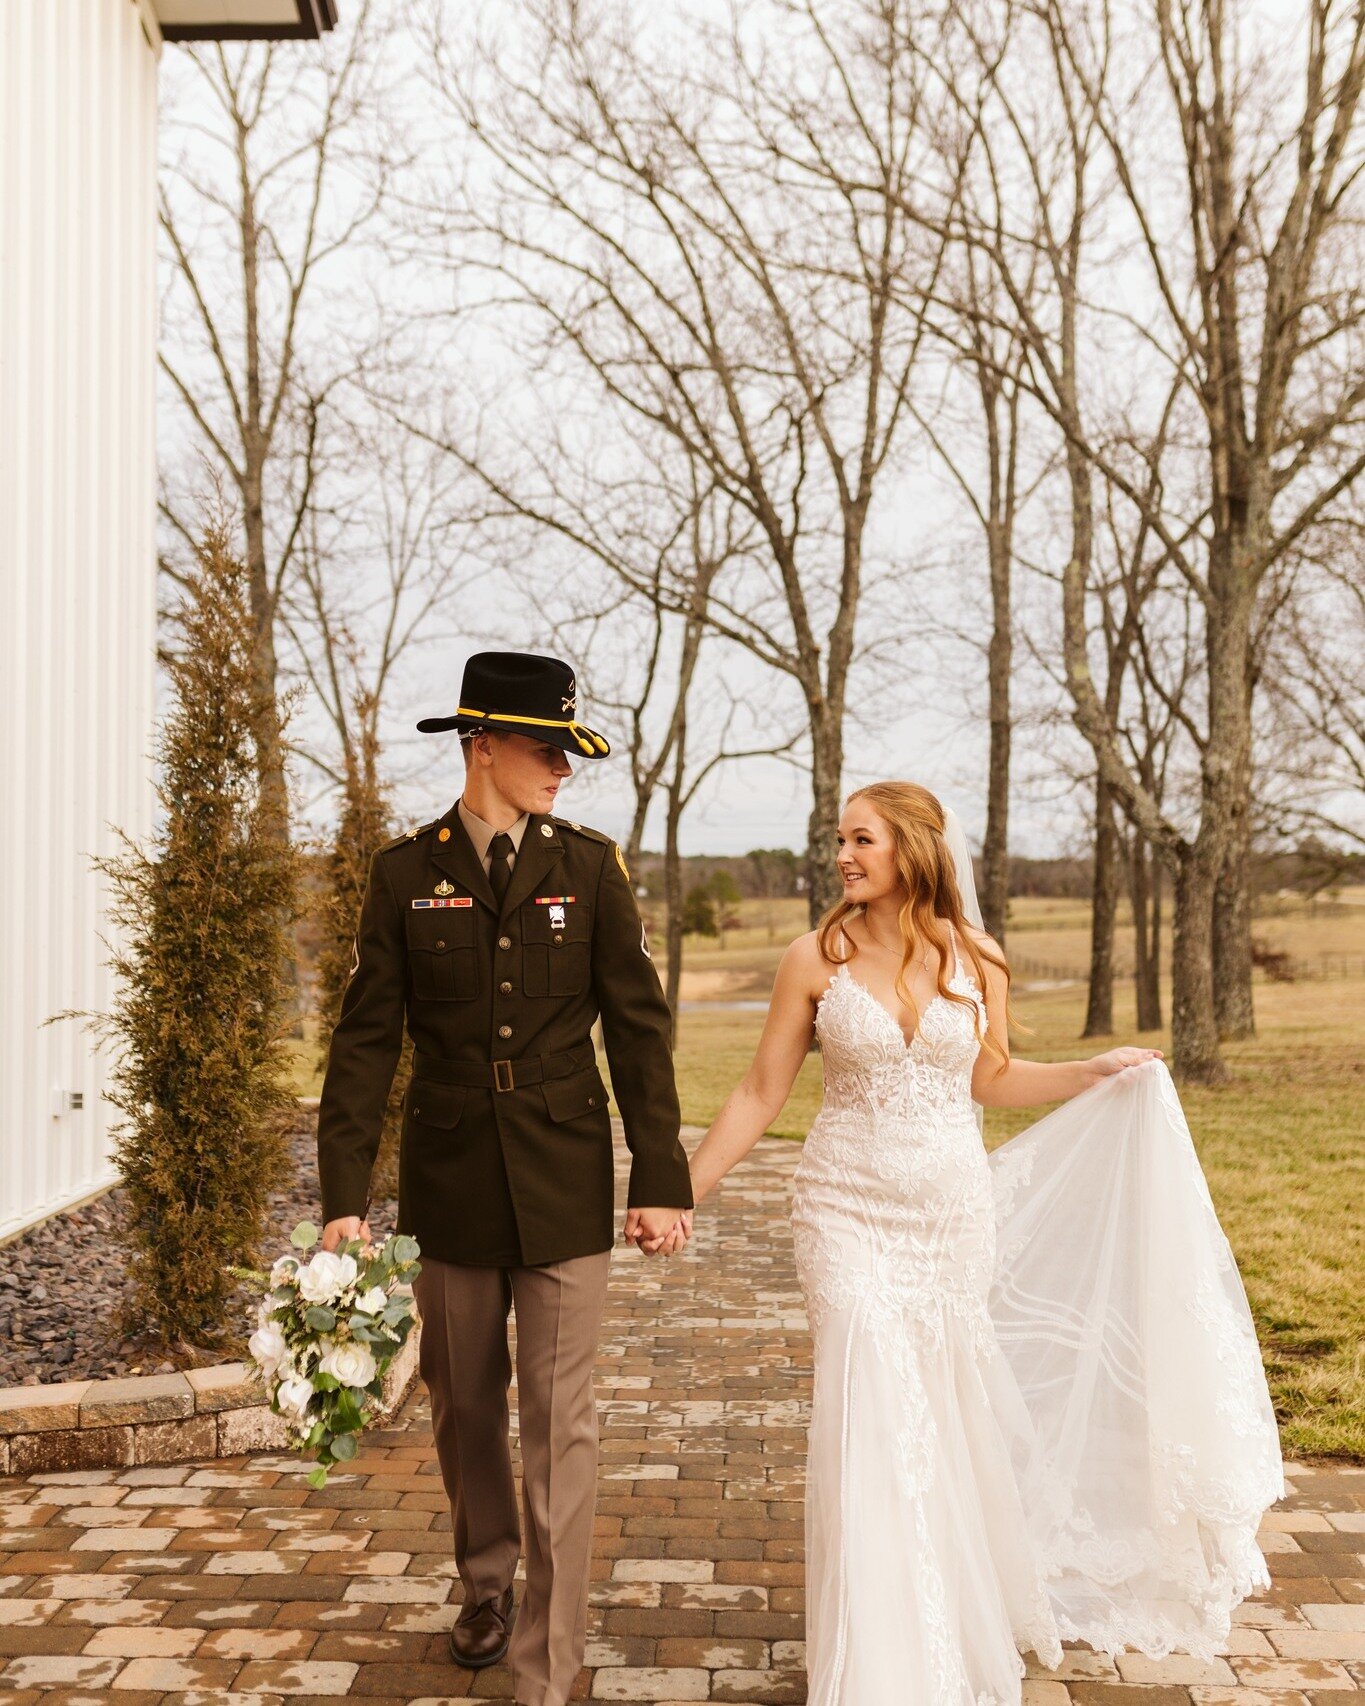 Step into forever with your love at Pine Meadows Venue 🤍 Click the link in our bio for all our available dates through 2025! You'll find pricing info too 😉

Photographer: @amaggiophoto 
Cake: @jeffwood471 
Groomsmen Wear: @menswearhouse 
DJ: @eleva